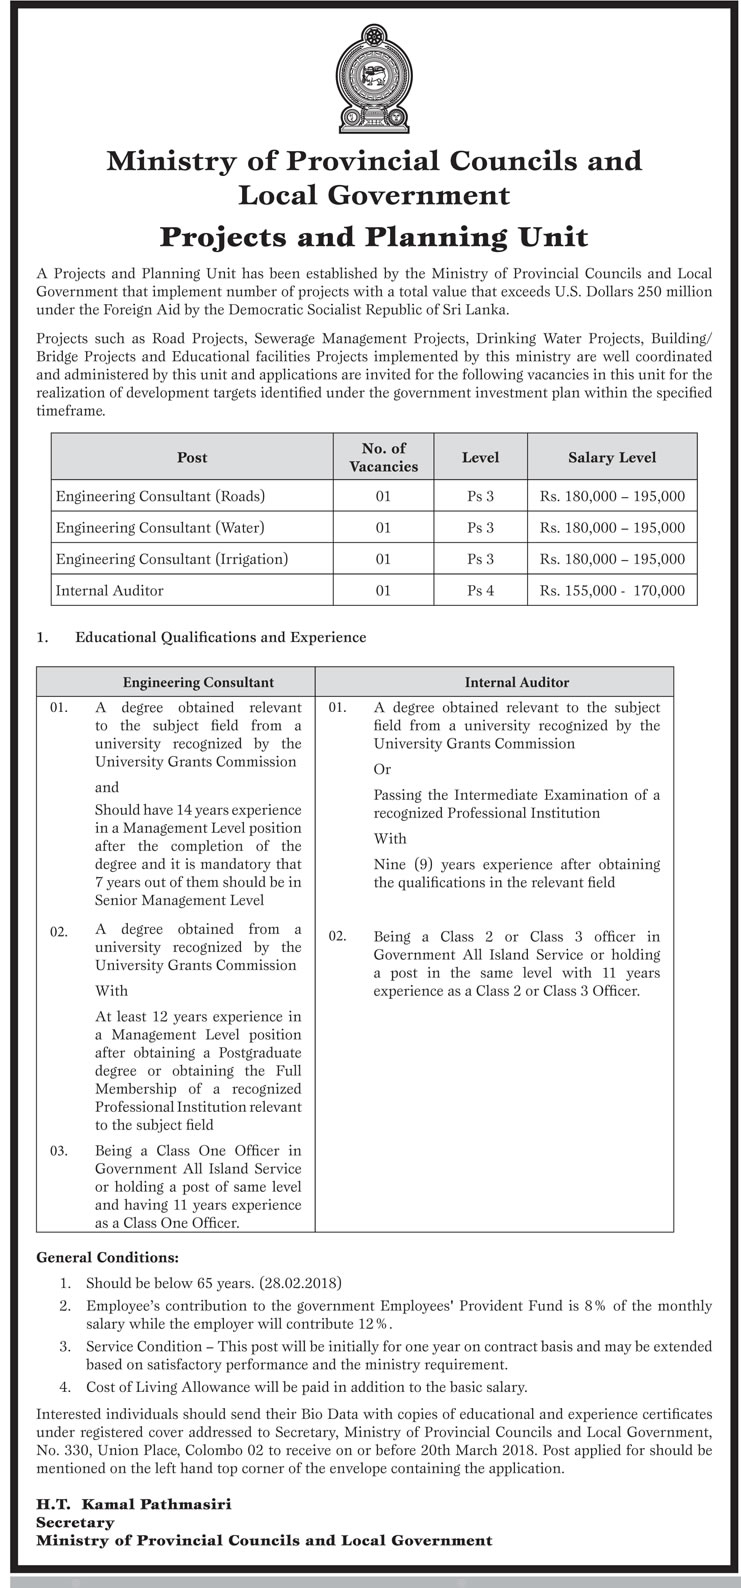 Engineering Consultant / Internal Auditor - Ministry of Provincial Councils & Local Government